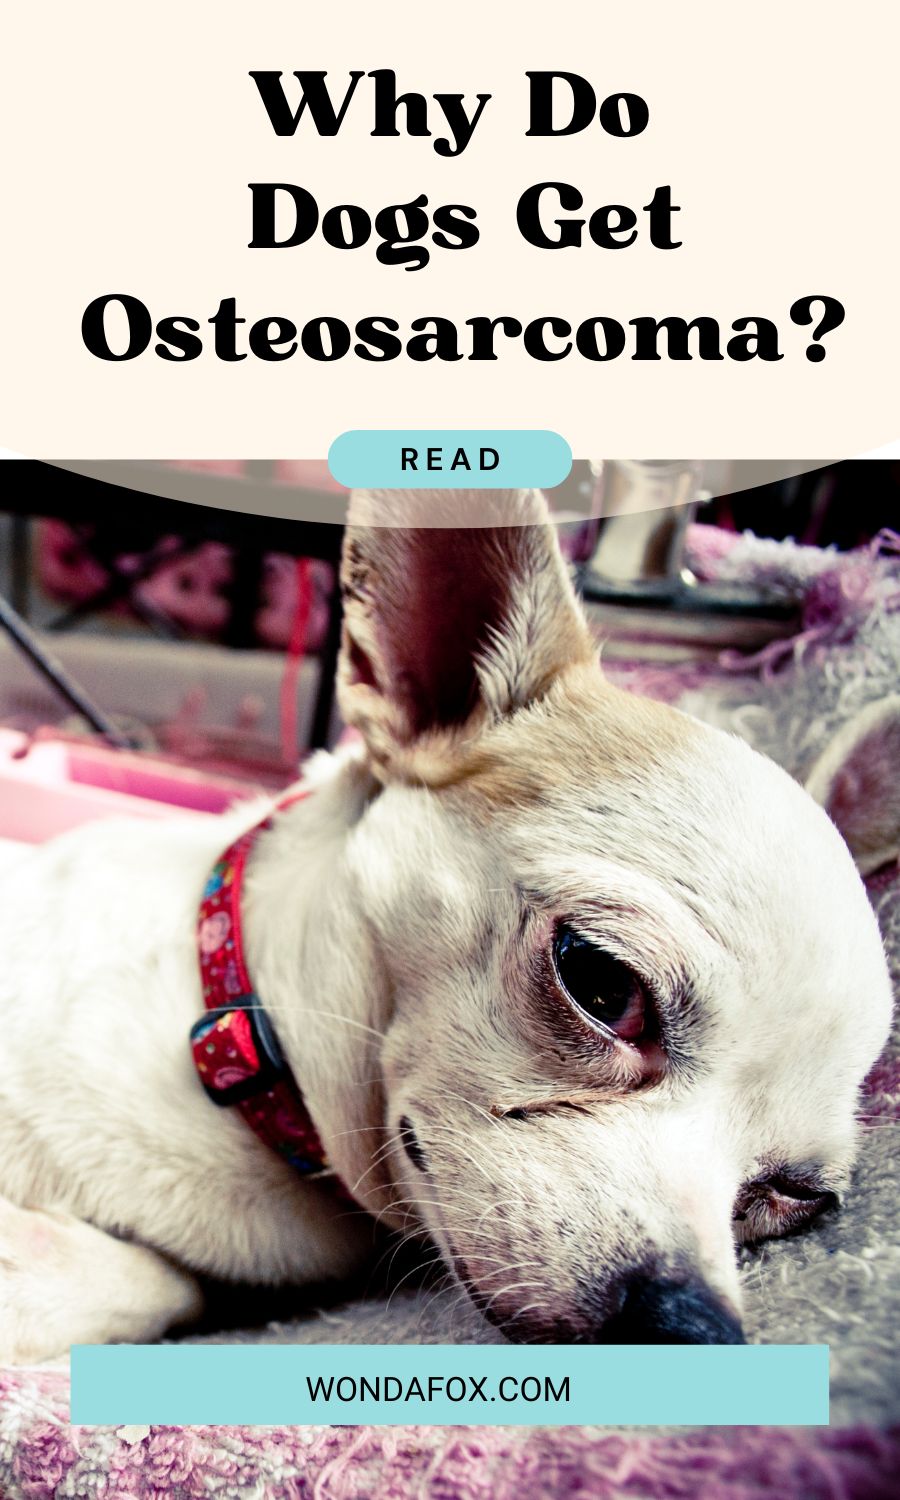 Why do Dogs get Osteosarcoma?